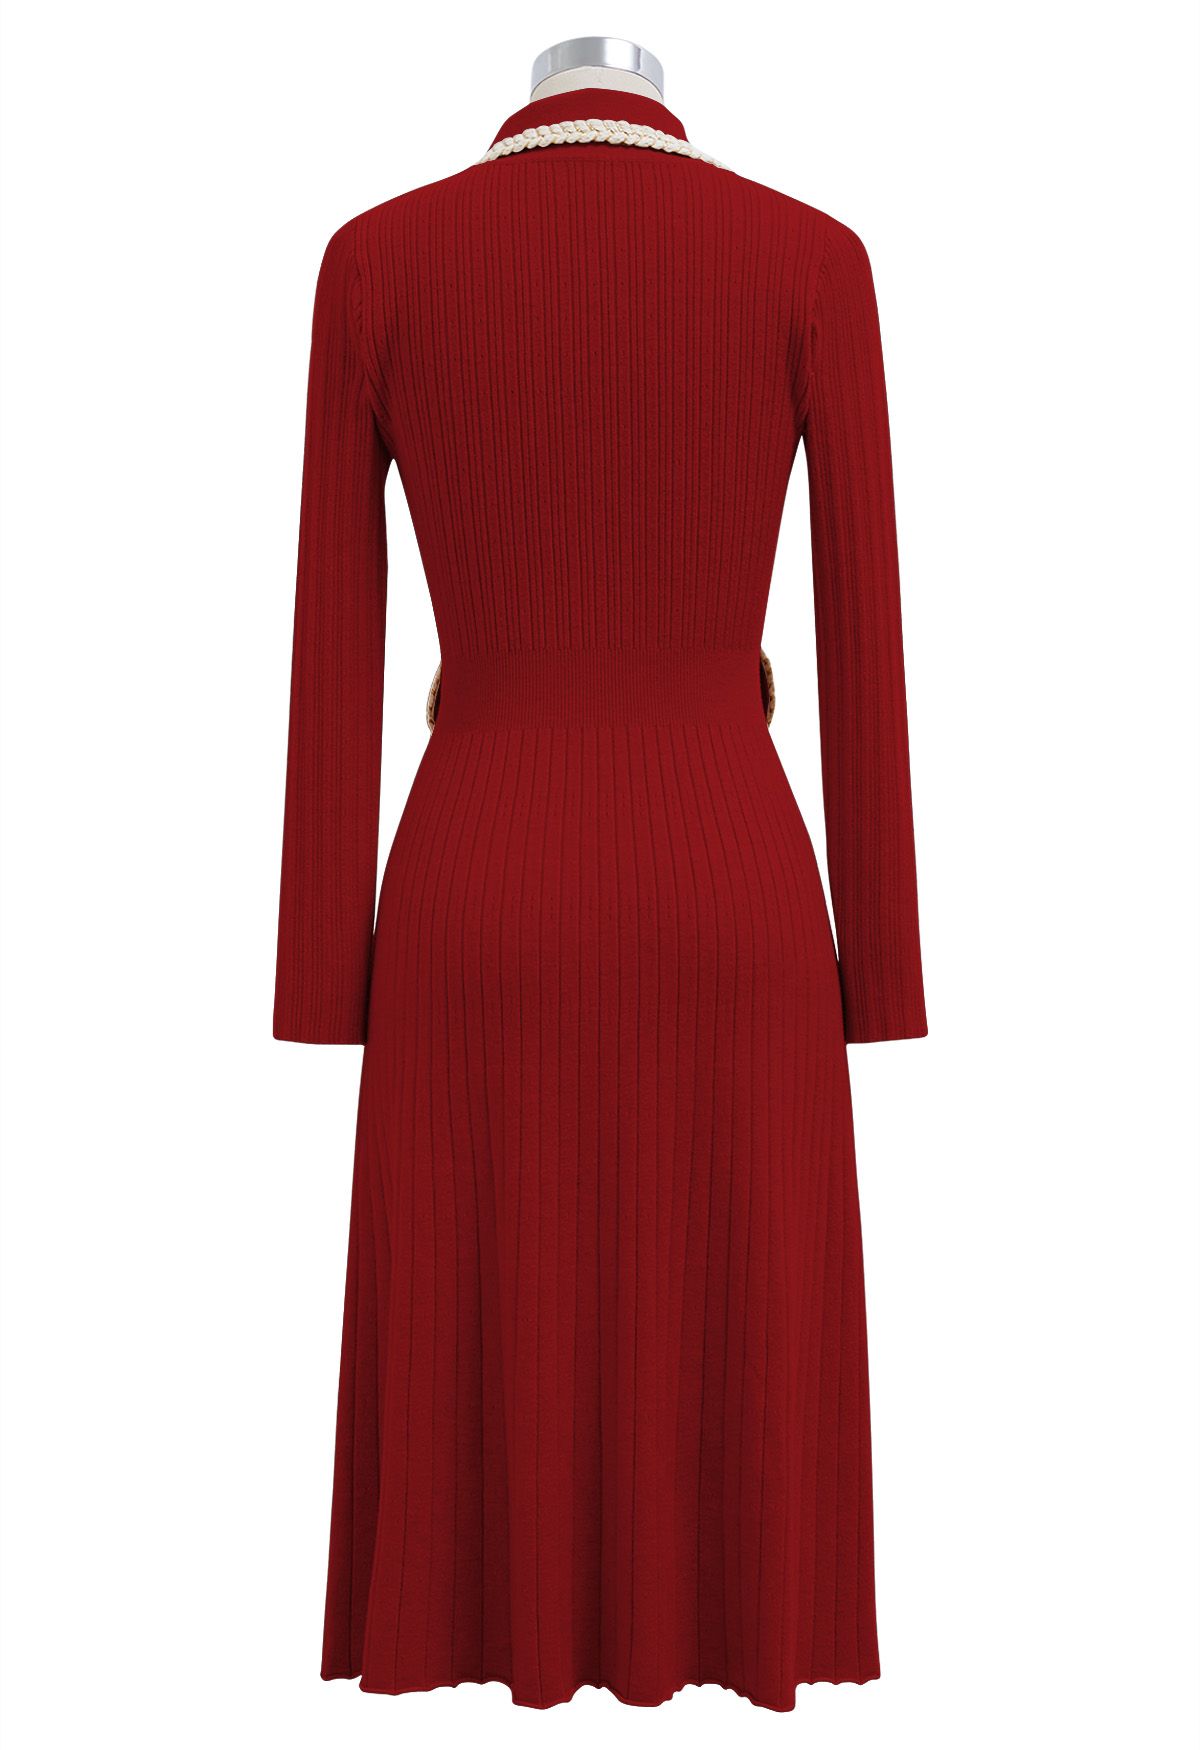 Collared Braided Edge Knit Midi Dress in Red